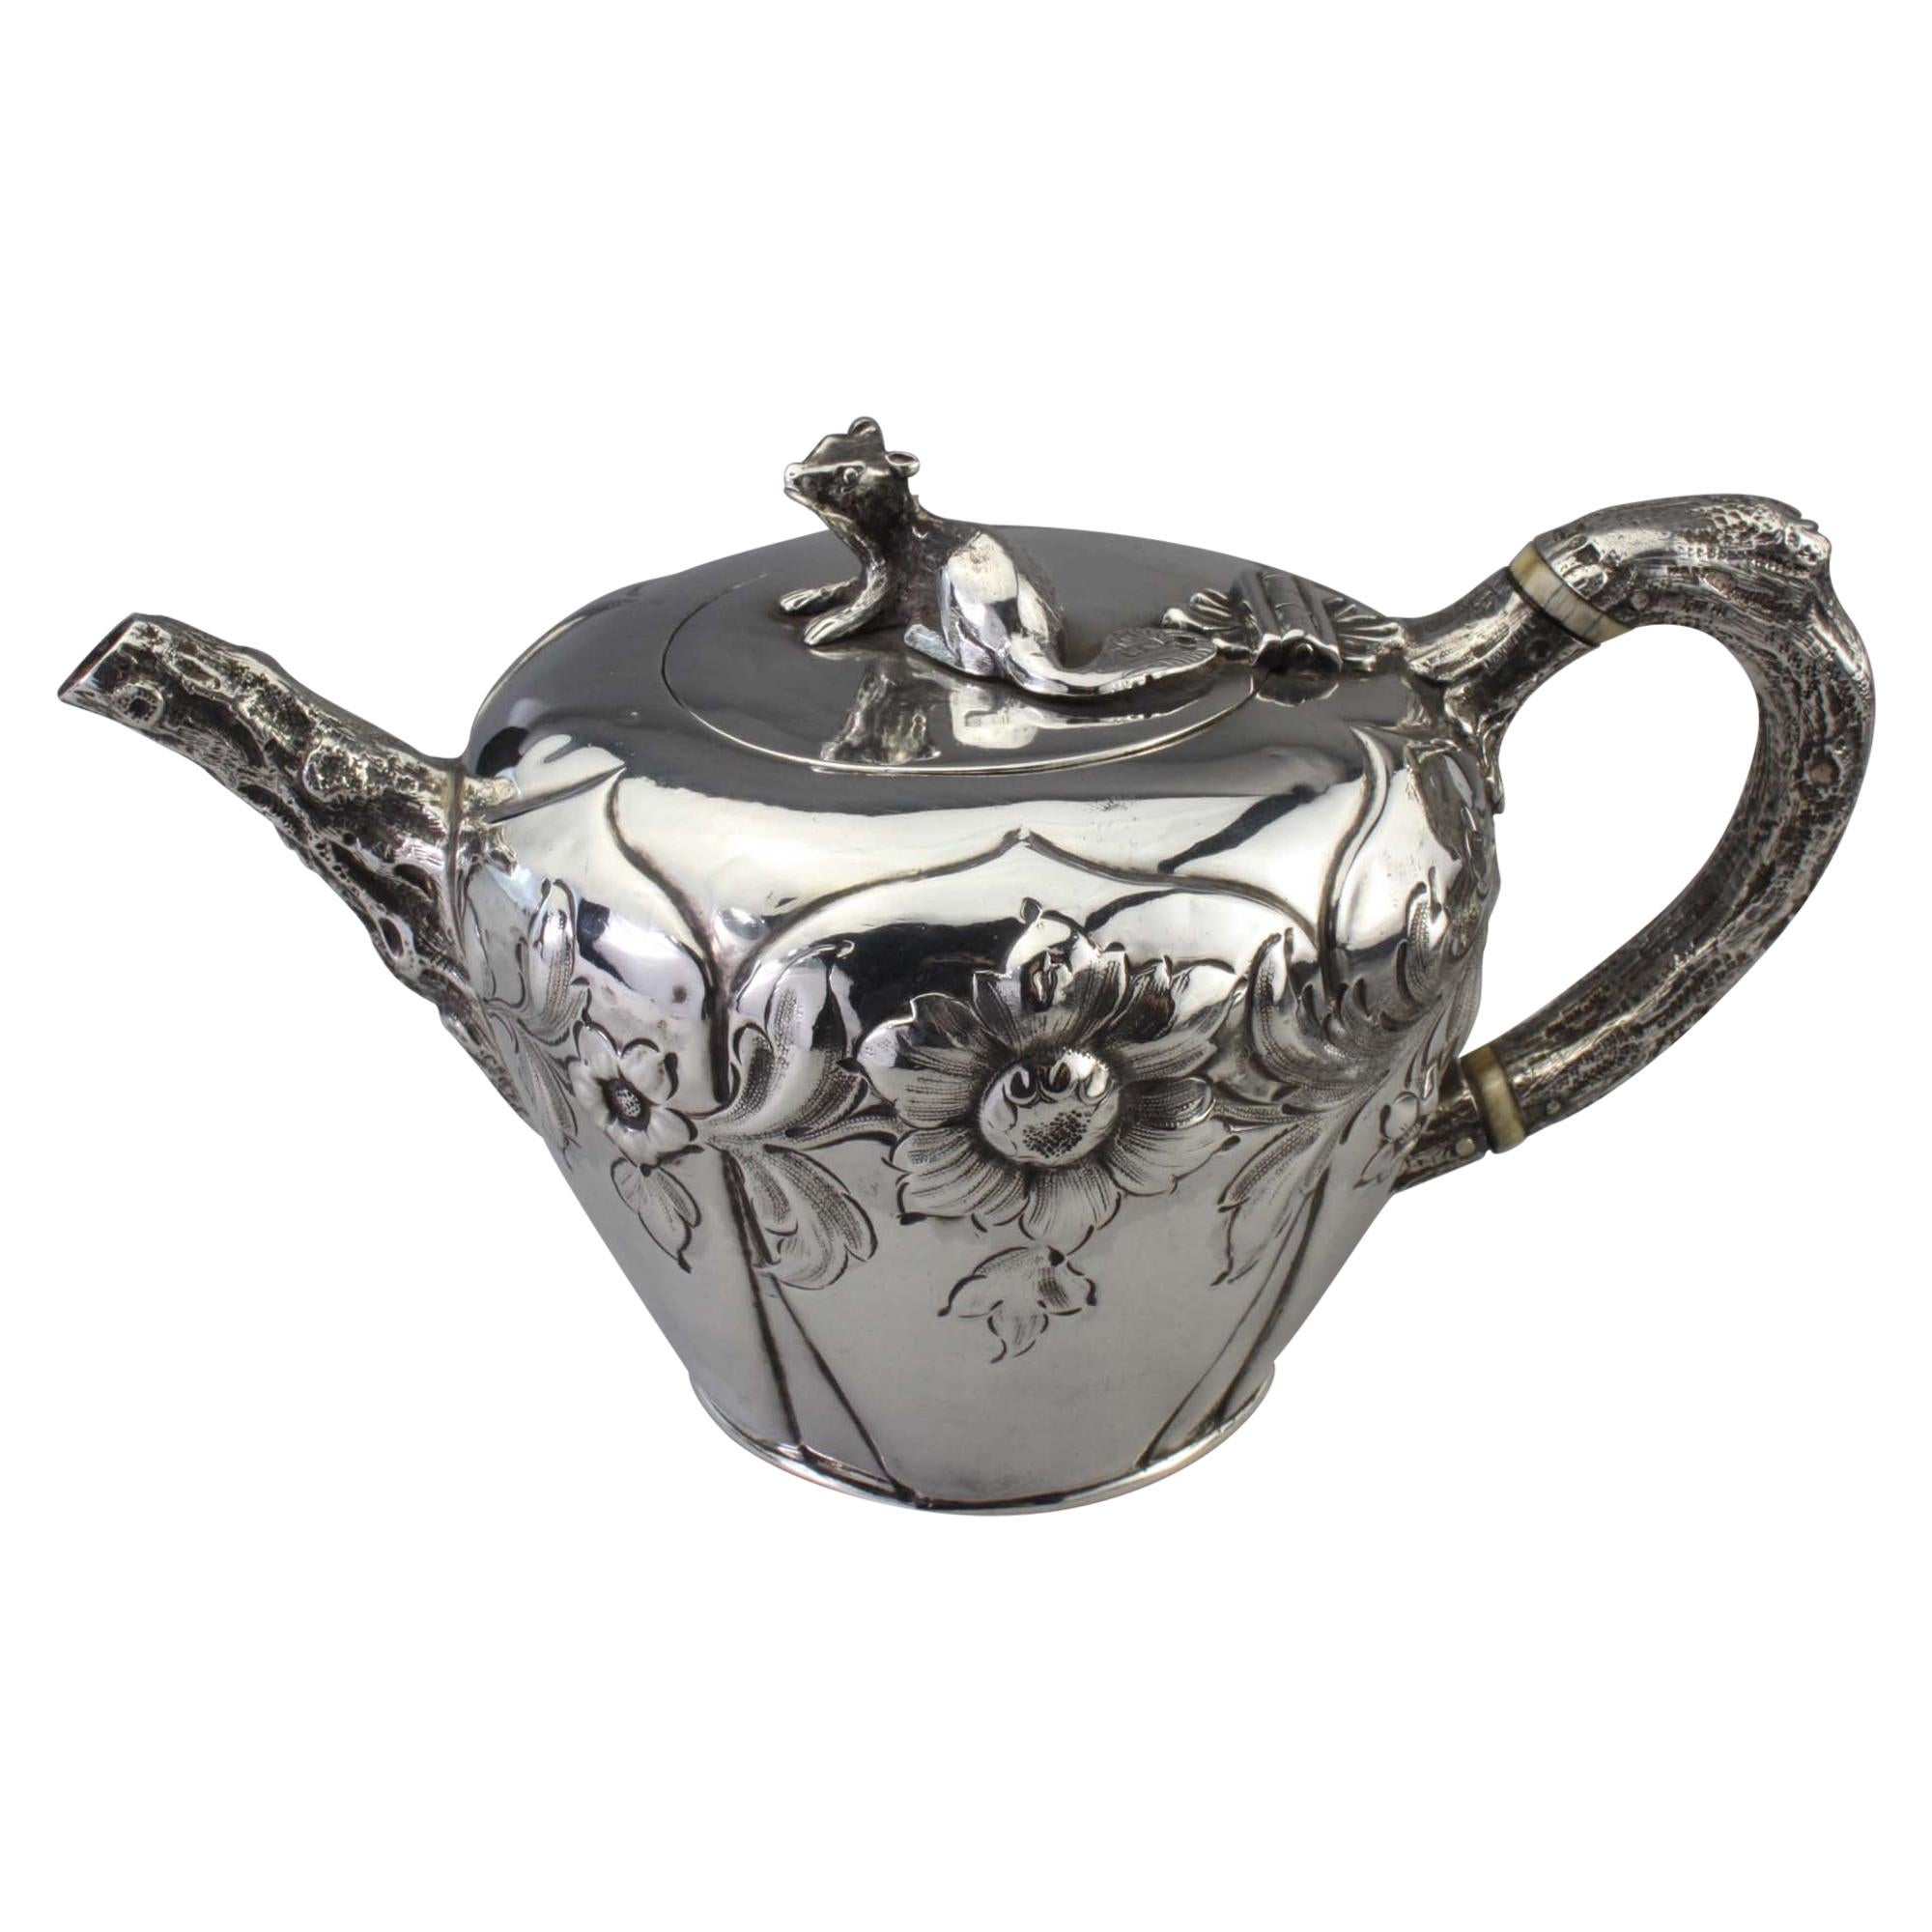 Antique Victorian Sterling Silver Bachelor's Tea Pot by William Moulson